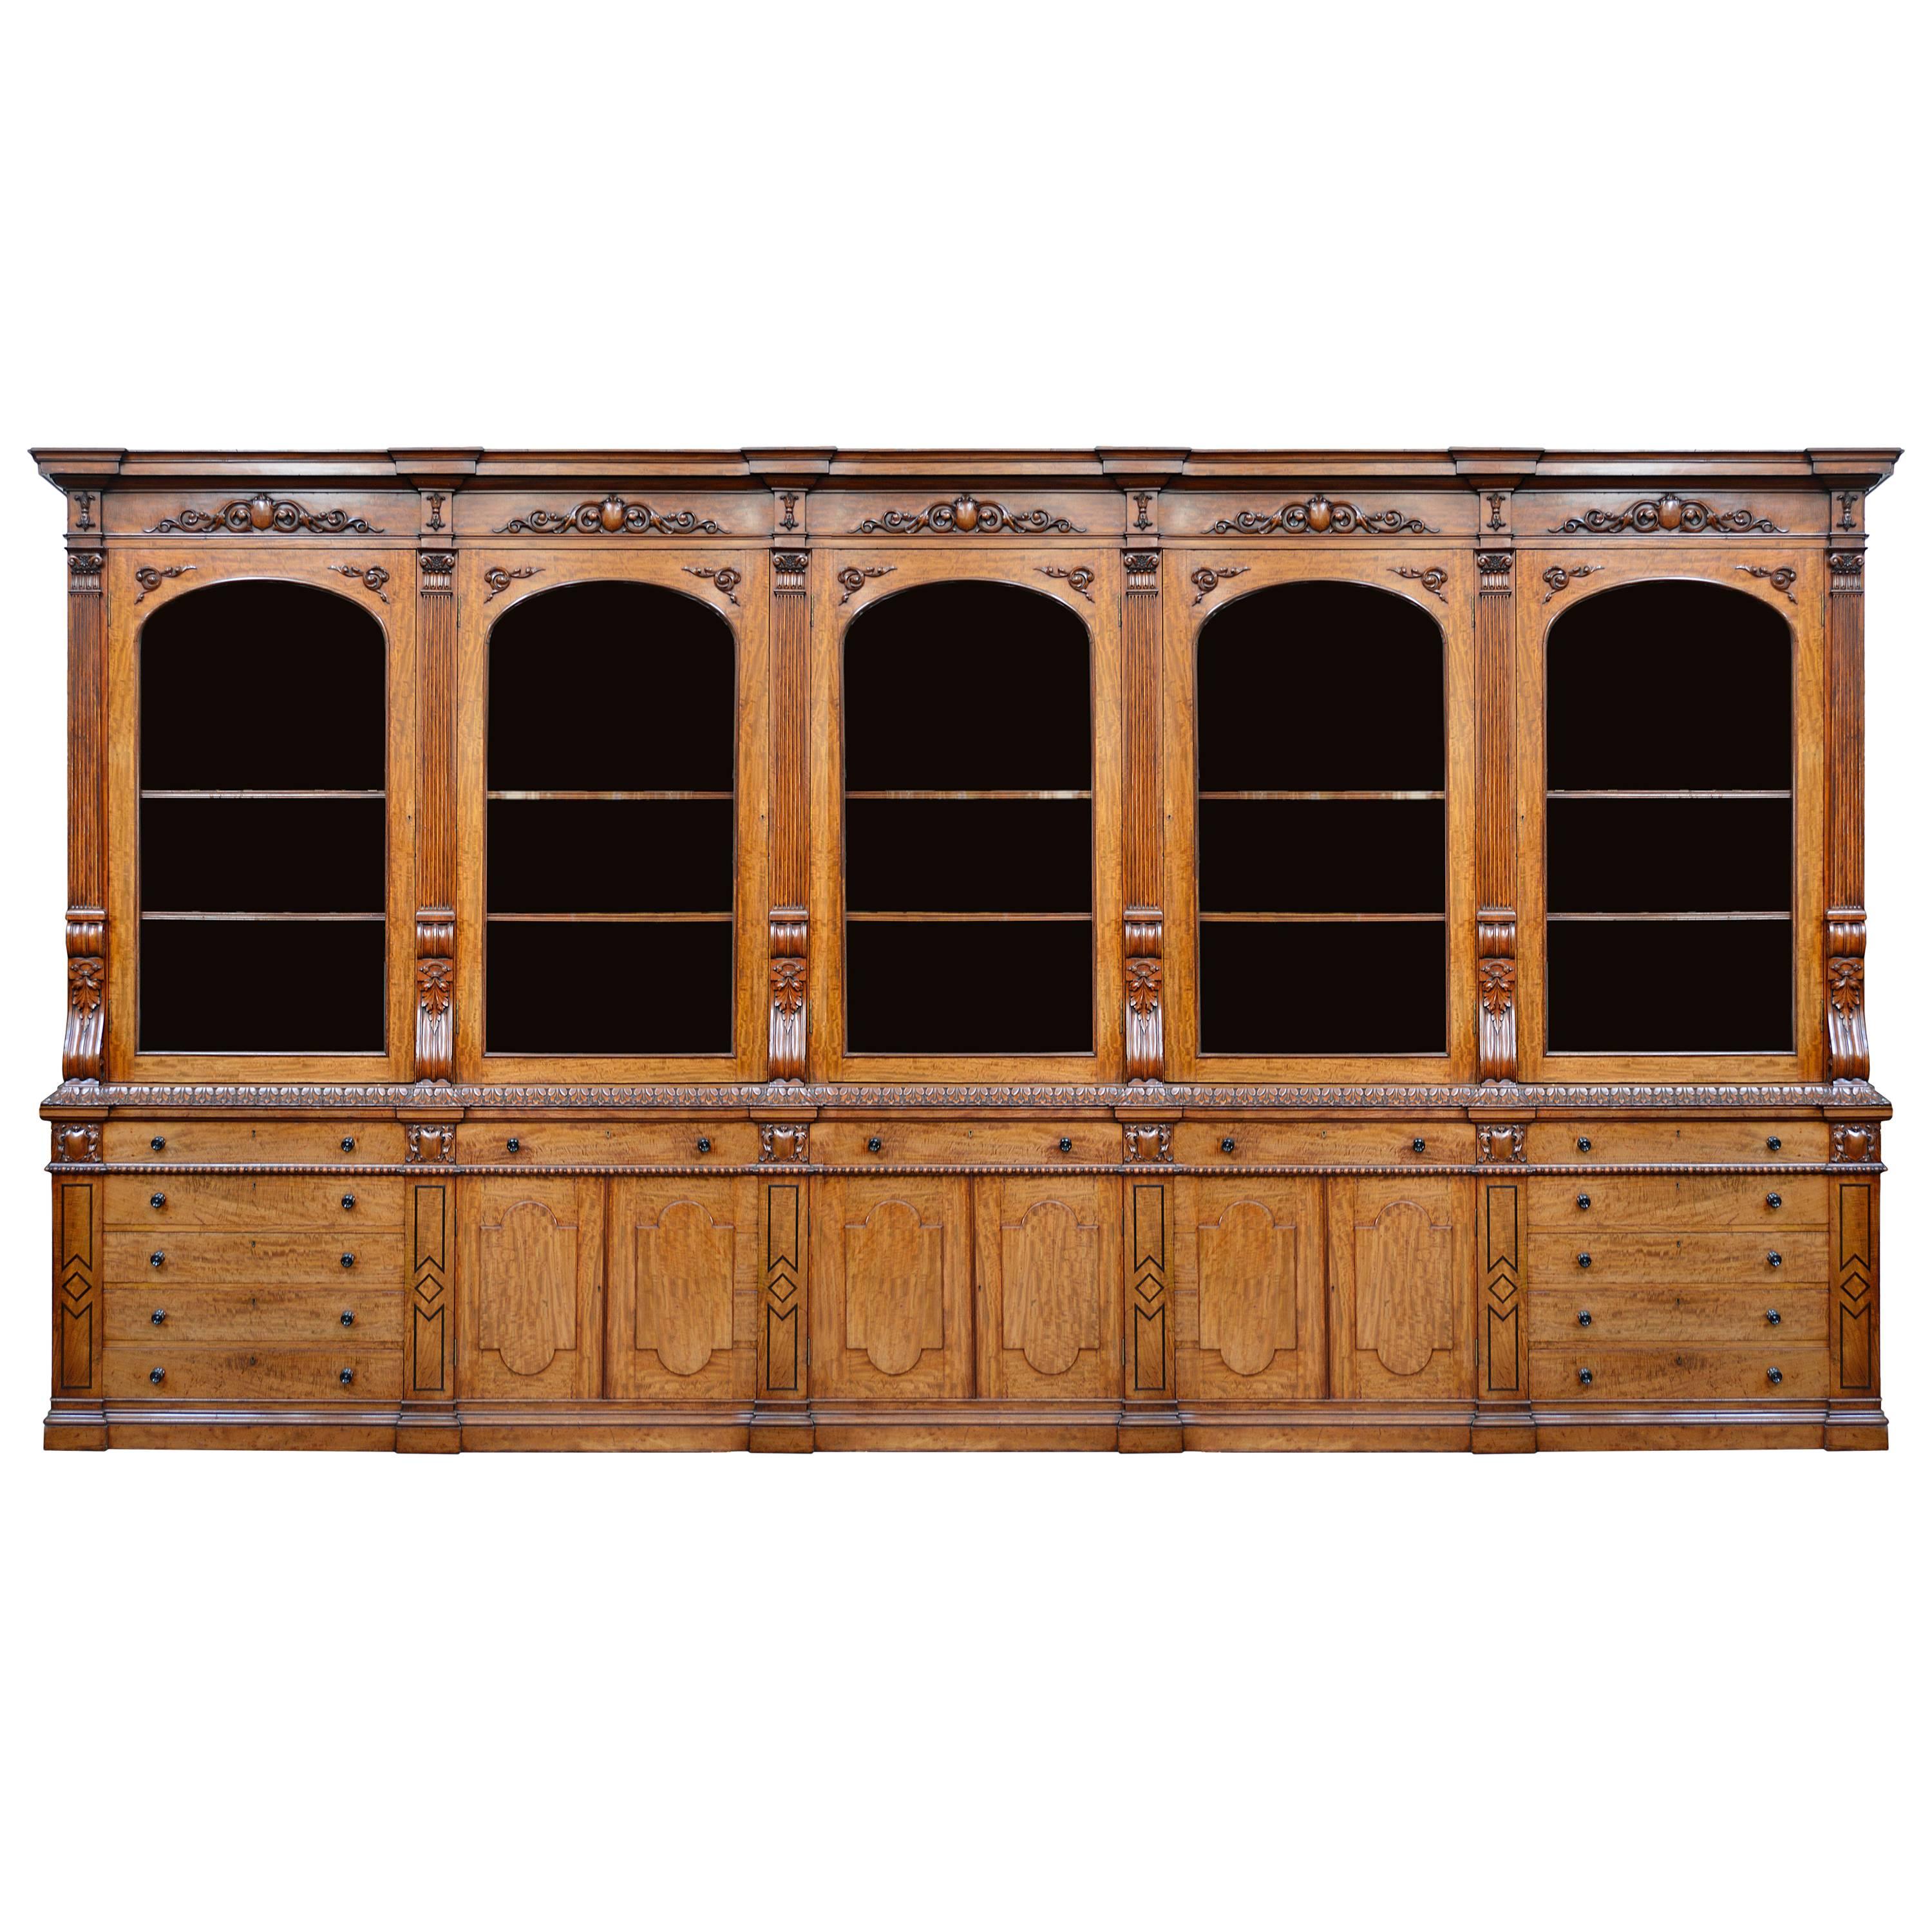 Large Late Regency Period Mahogany Library Bookcase